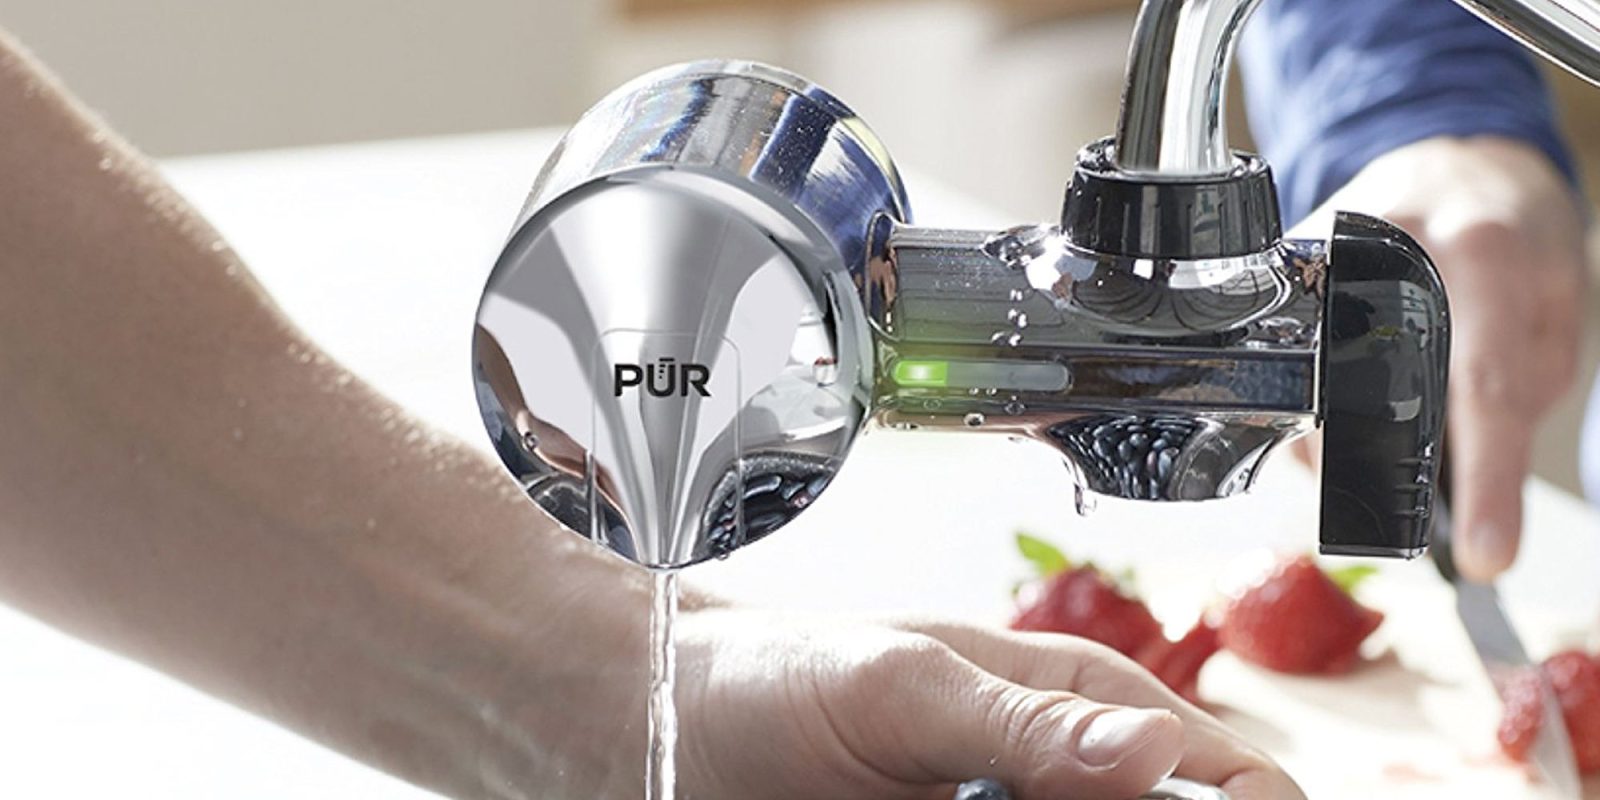 Drink PUR water w/ this advanced faucet filter system for